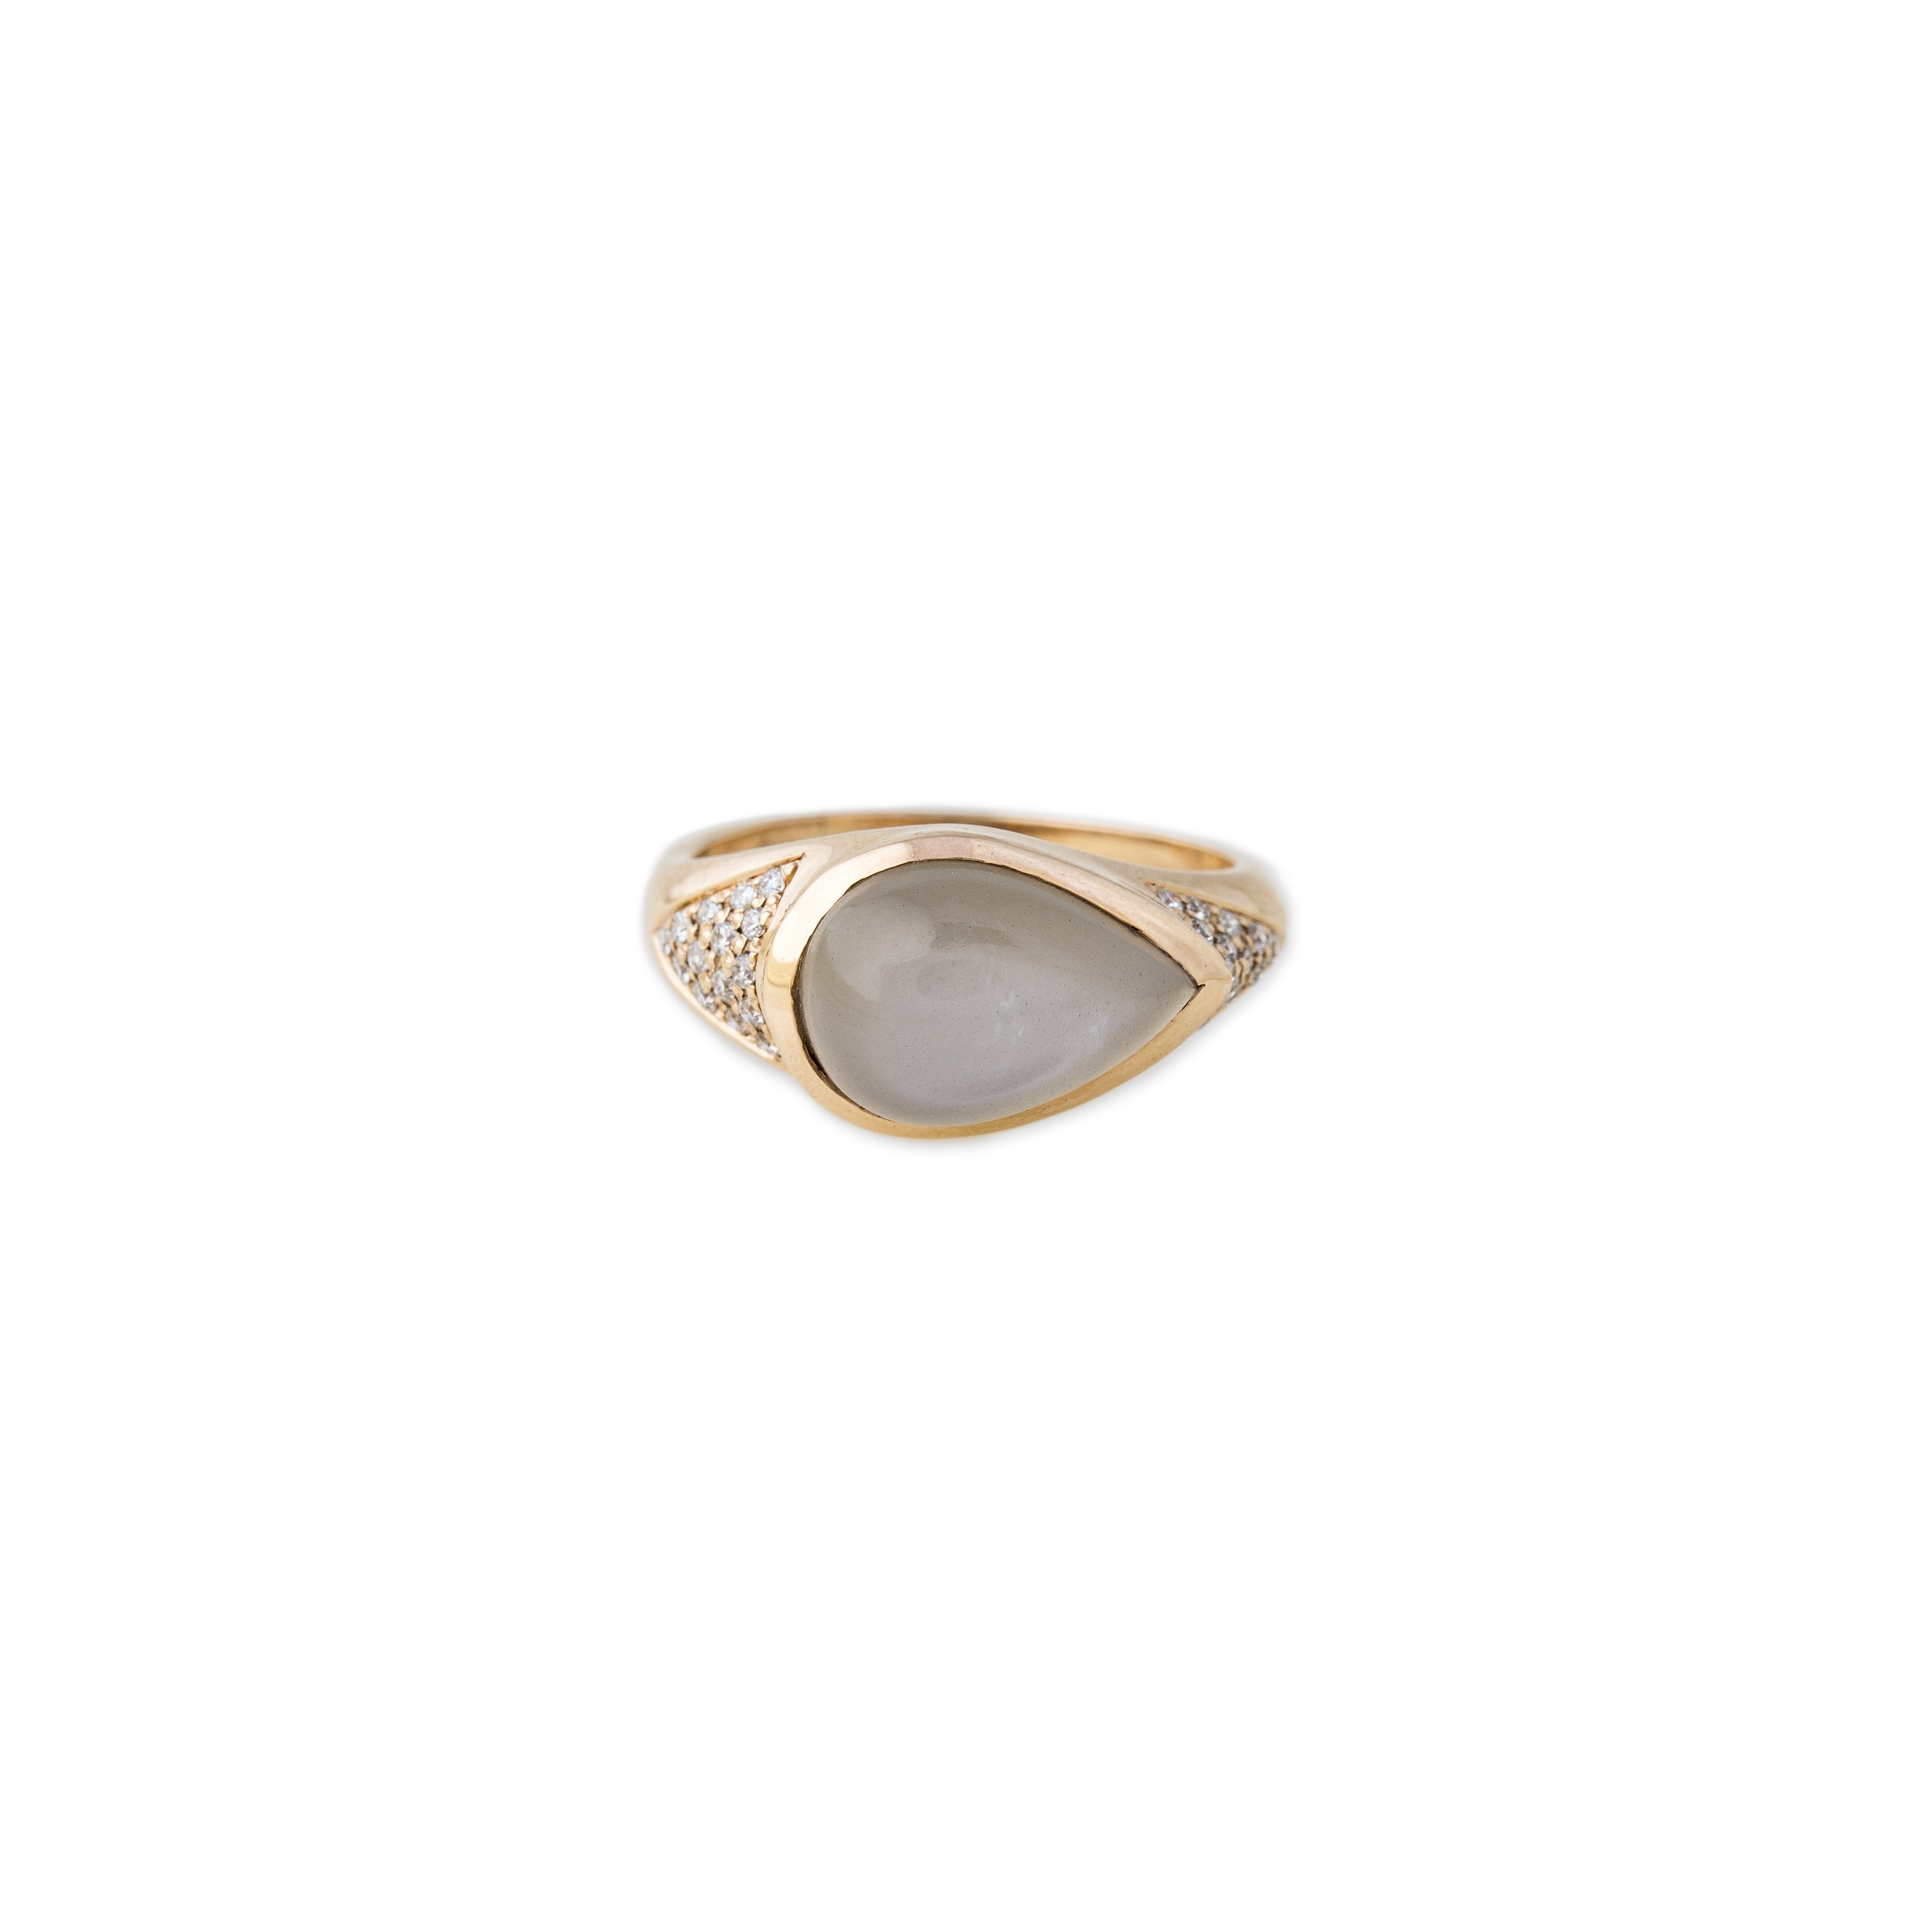 SMALL TEARDROP MOONSTONE SIGNET RING WITH PAVE SIDES